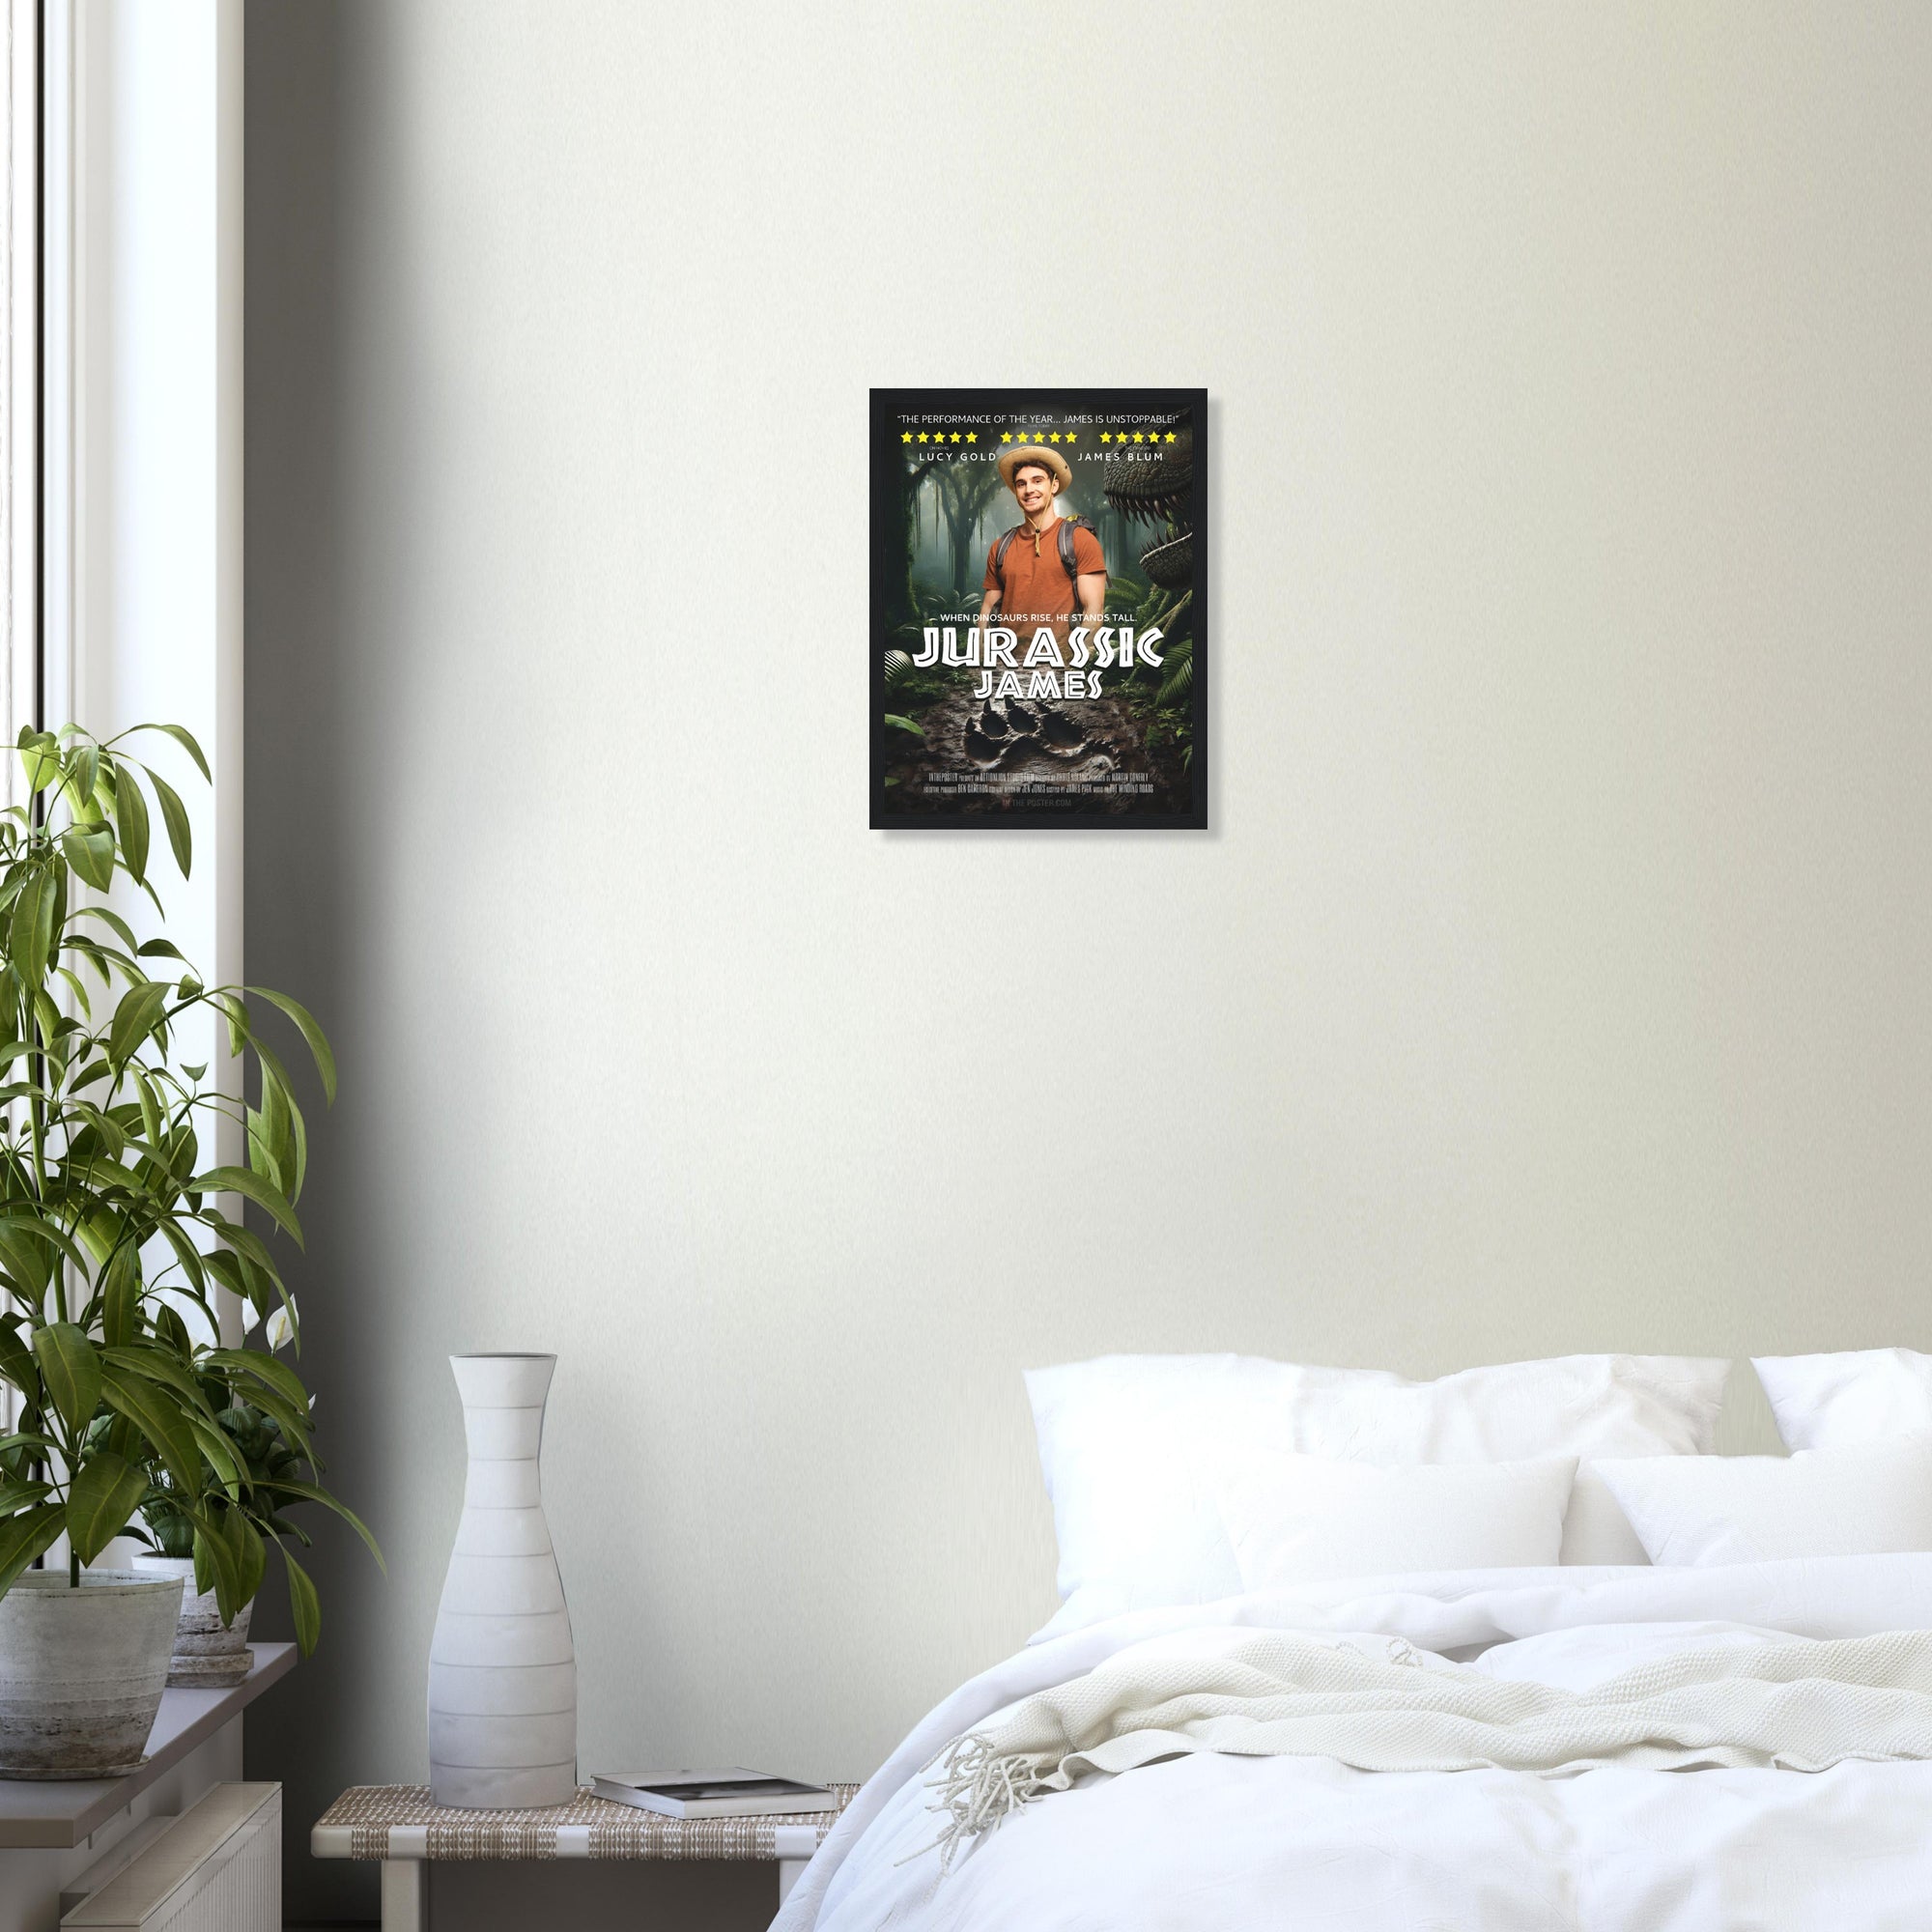 A small custom dinosaur-themed movie poster in a black frame is on a grey wall above a plant and a white bed.